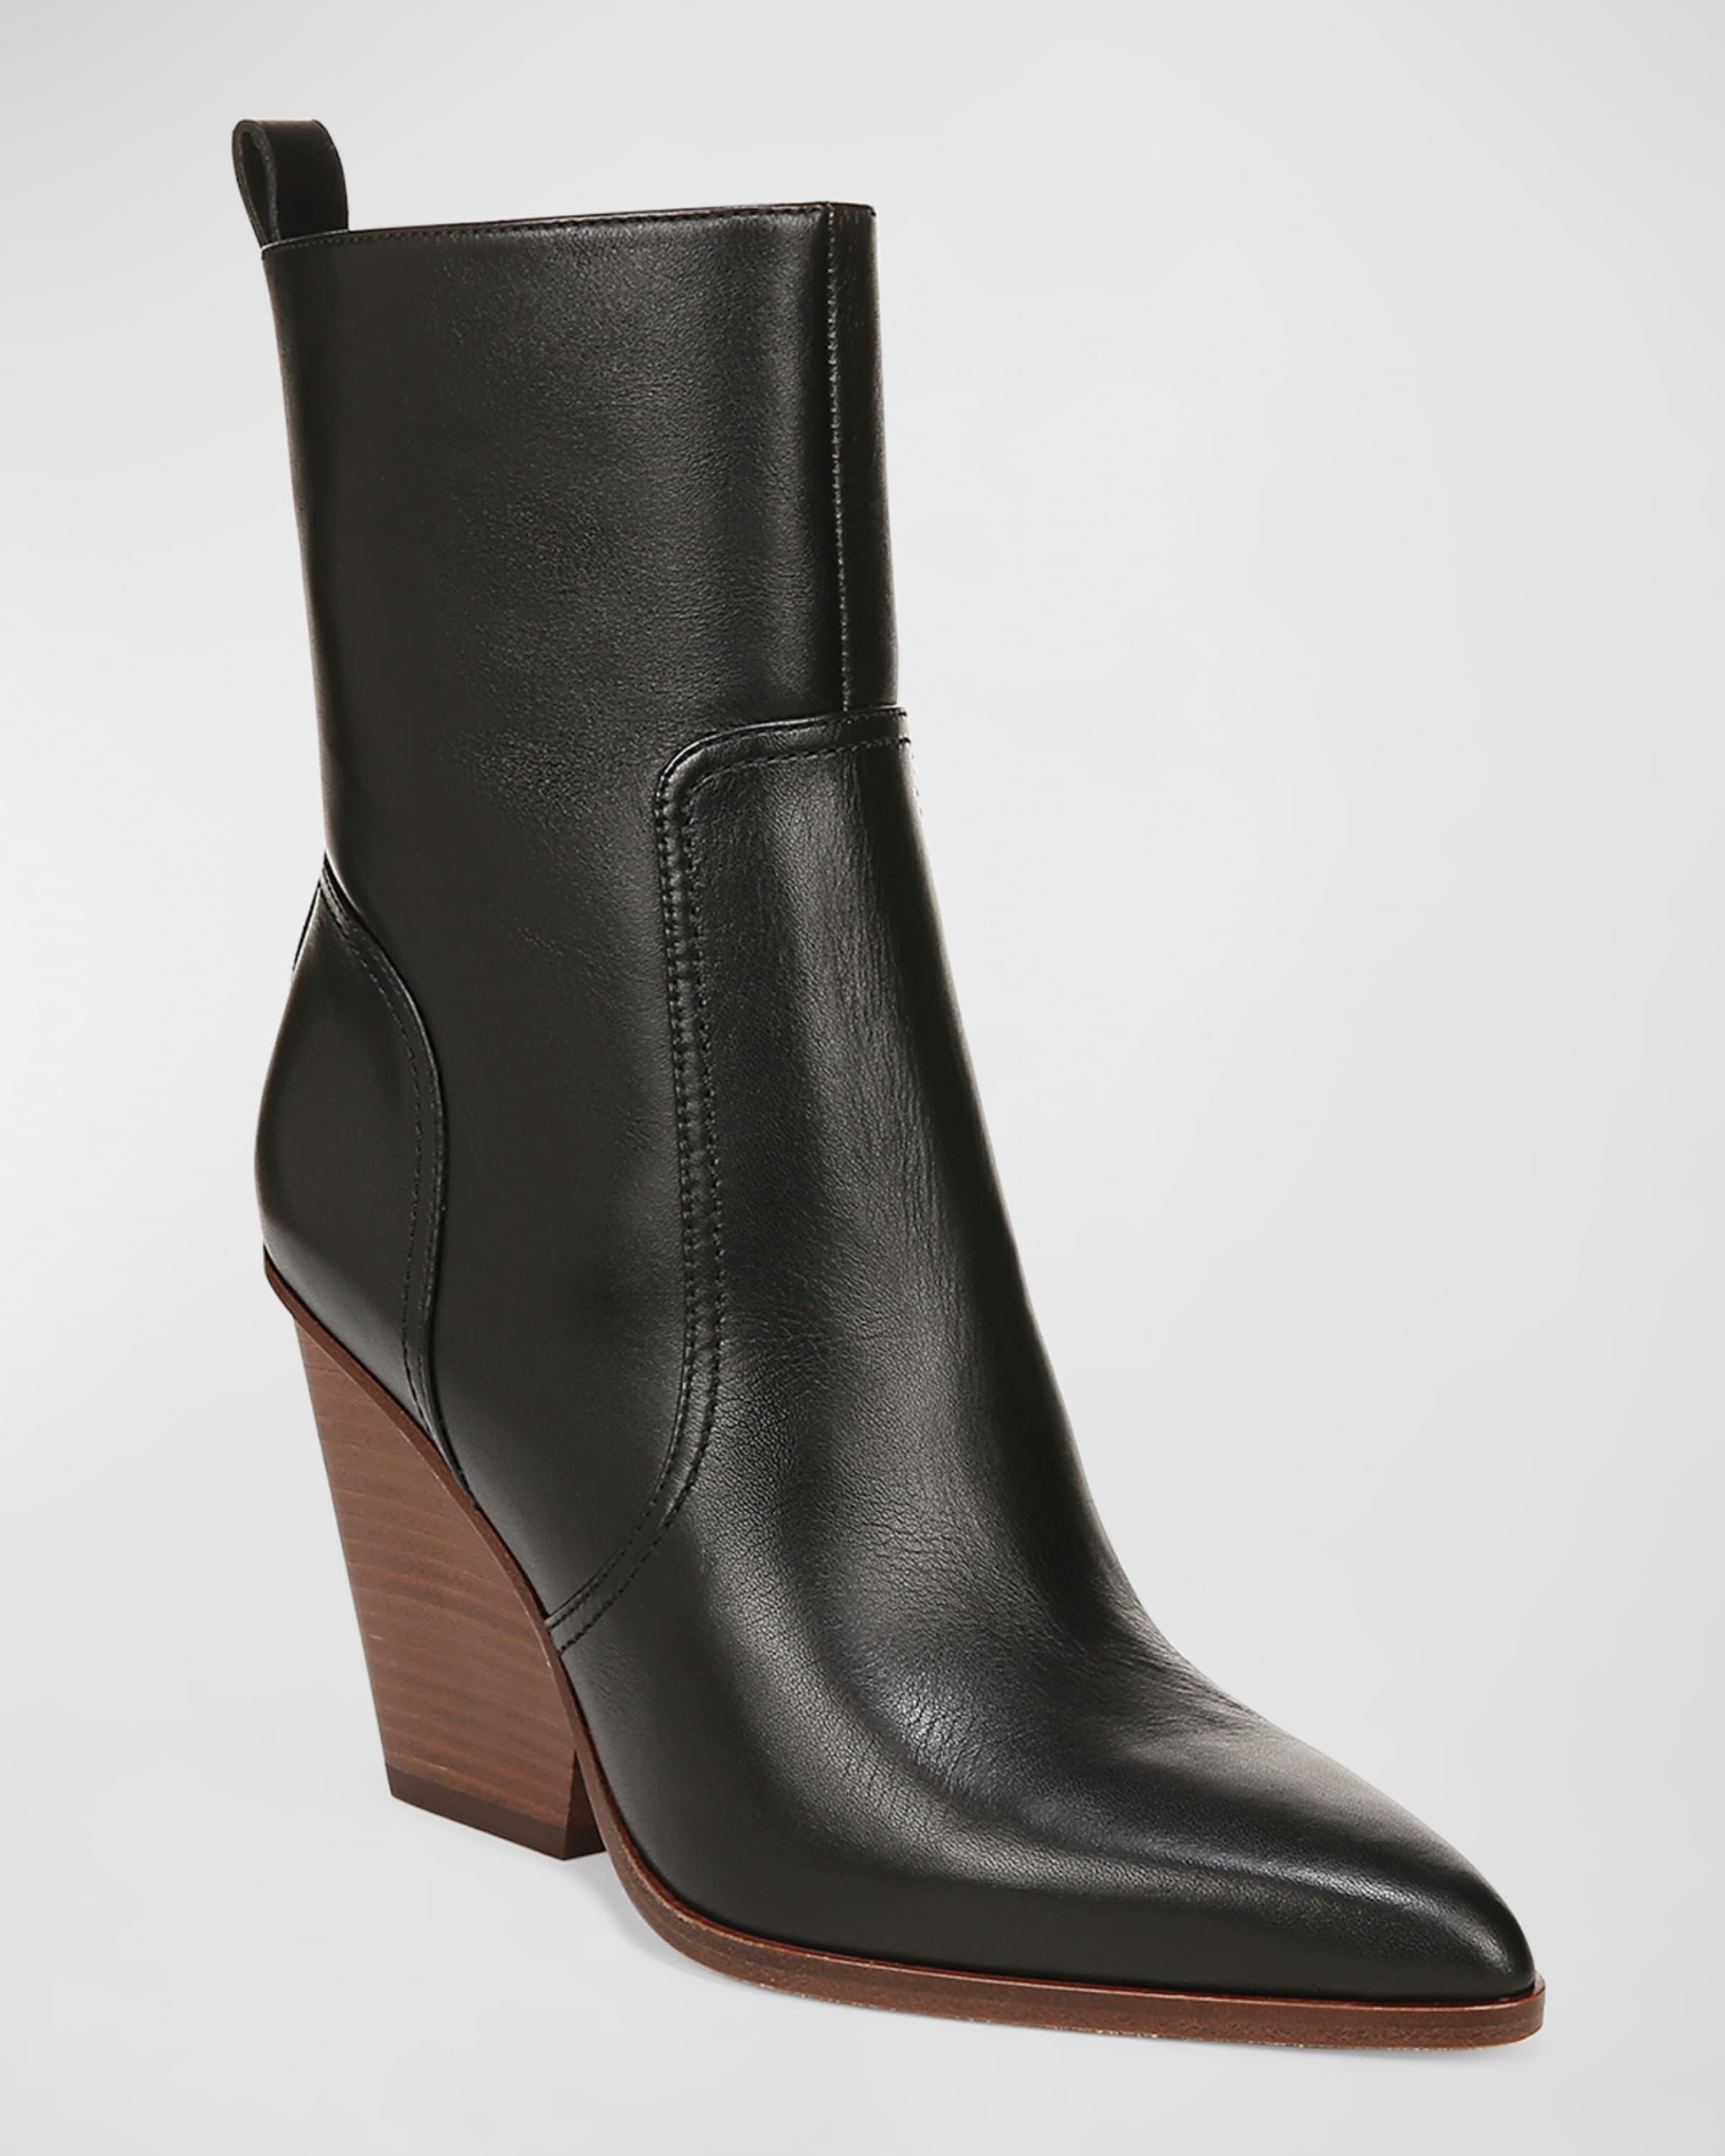 Logan Leather Ankle Boots - 4